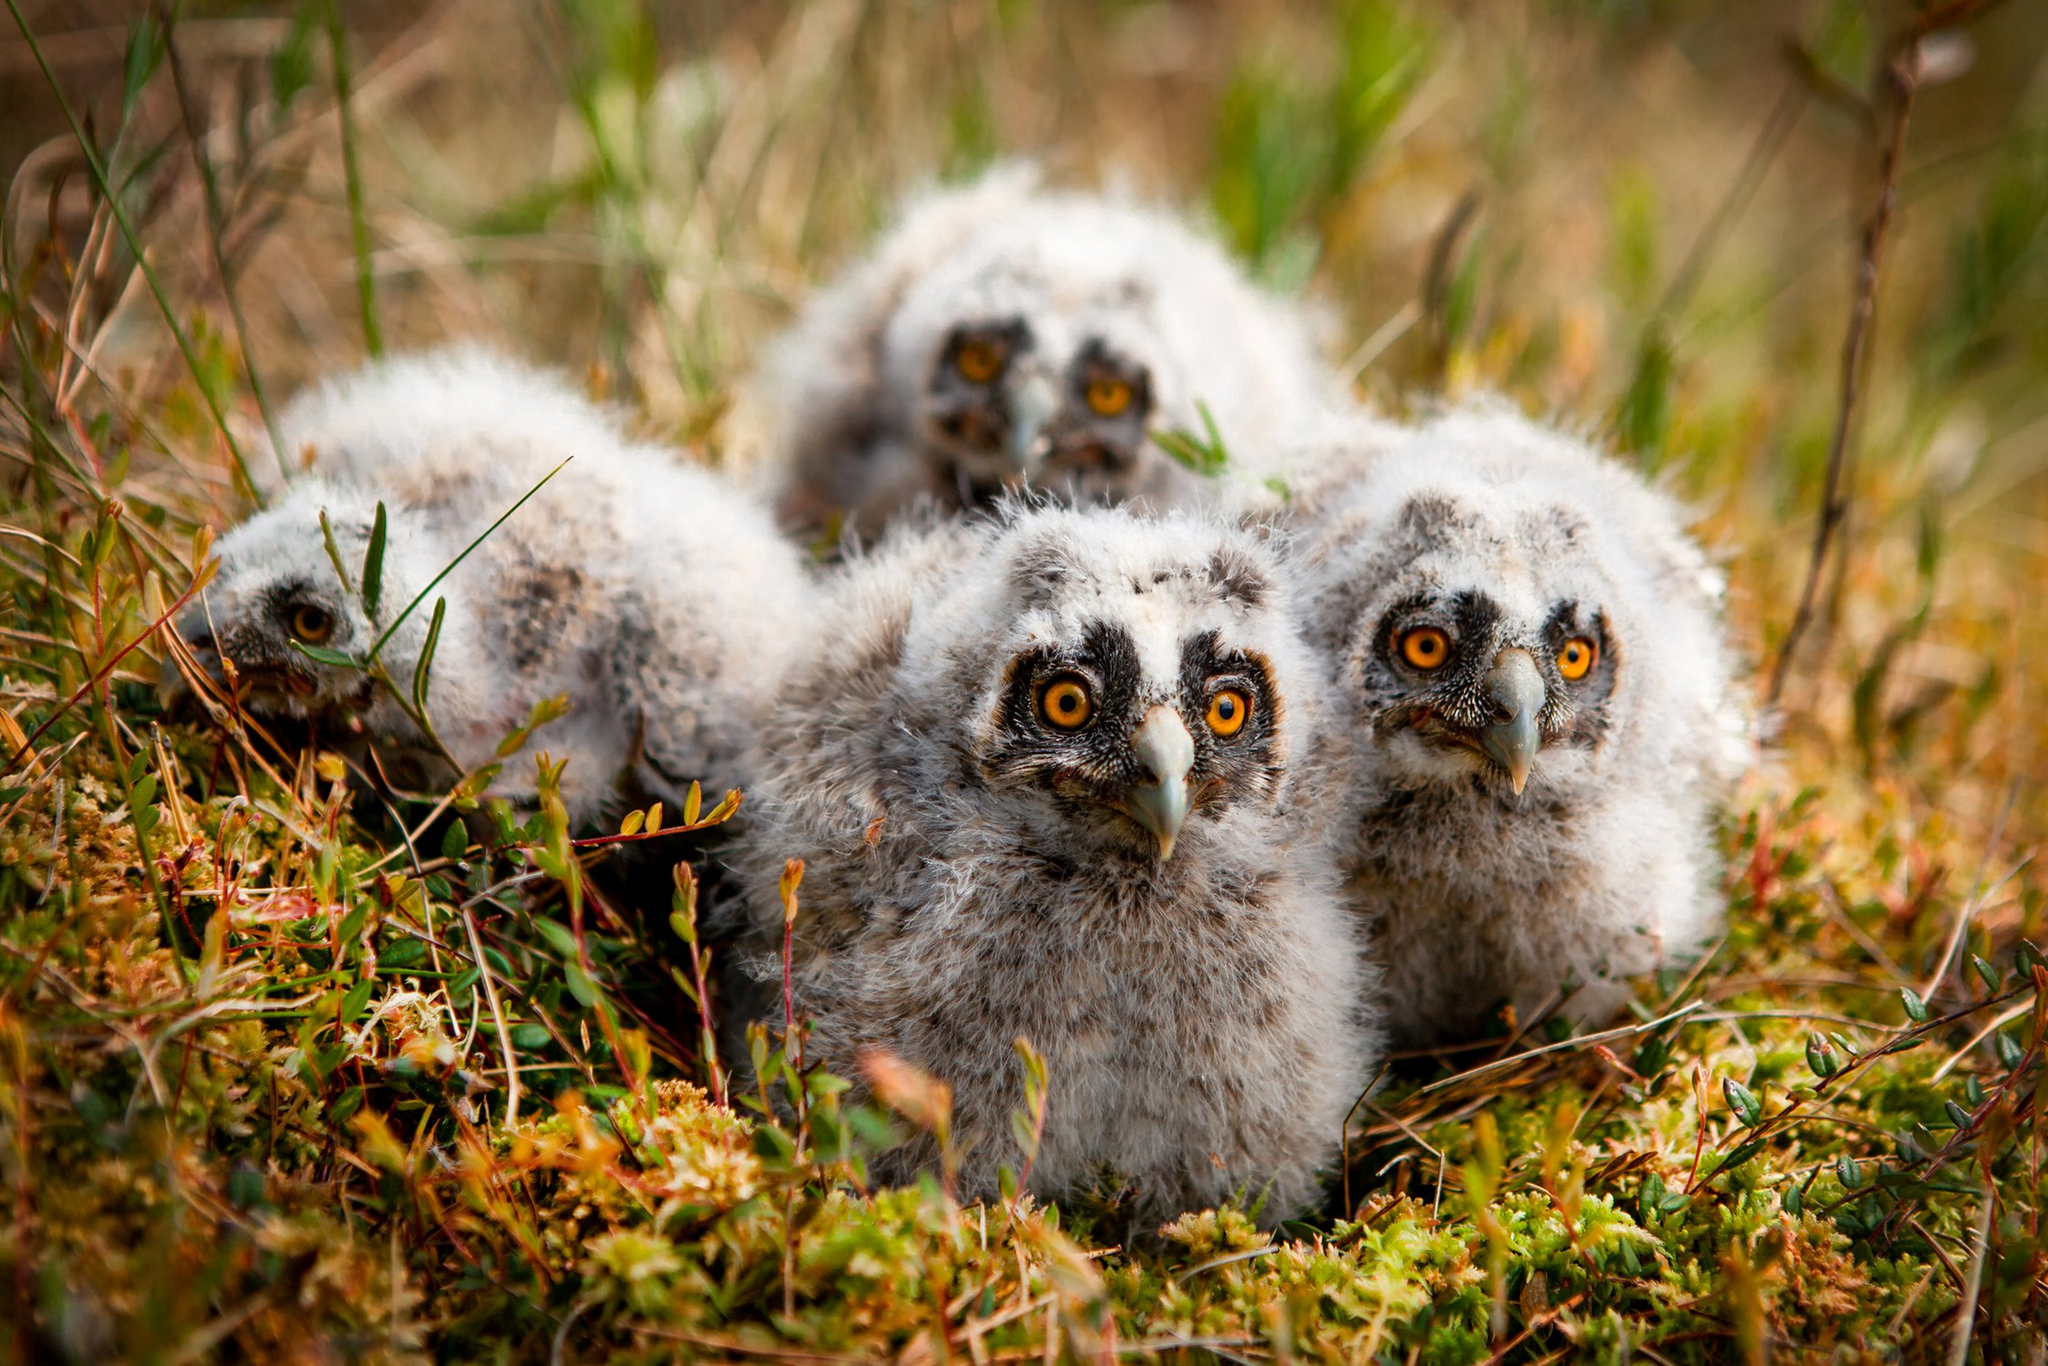 Care is not always obvious - Eared, Owl, Owls, Predator birds, Ringing, Accounting, wildlife, Republic of Belarus, Birds, The national geographic, The photo, Milota, Longpost, Chick